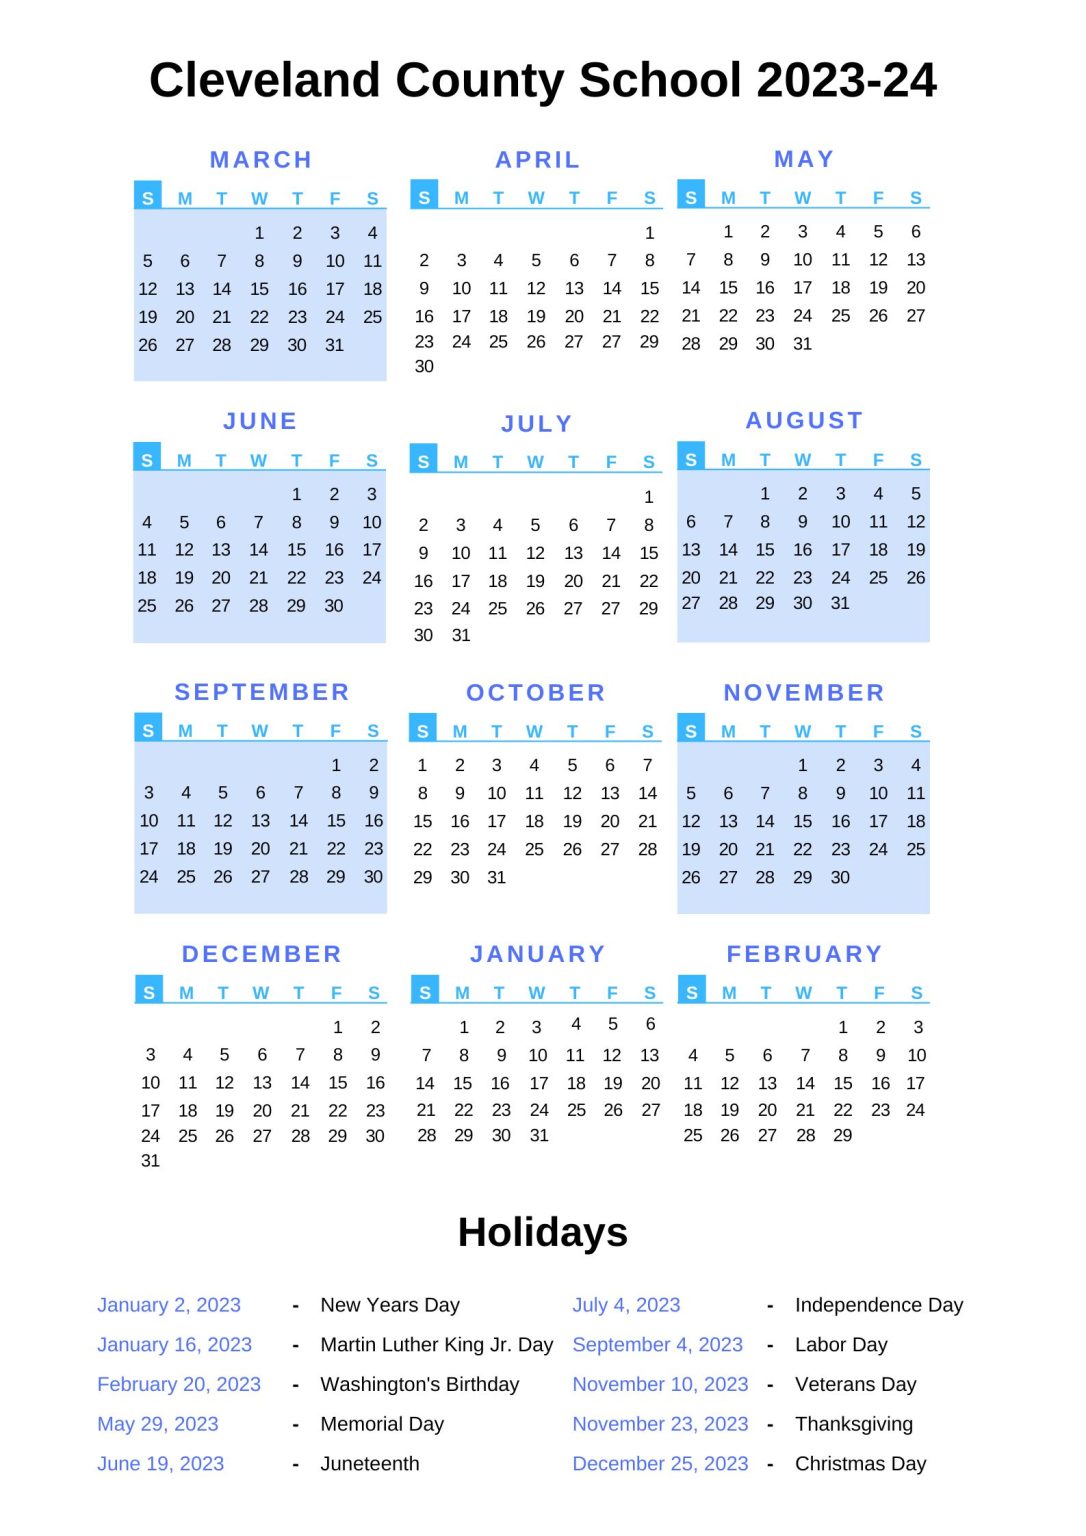 Cleveland County Schools Calendar 2023 24 With Holidays